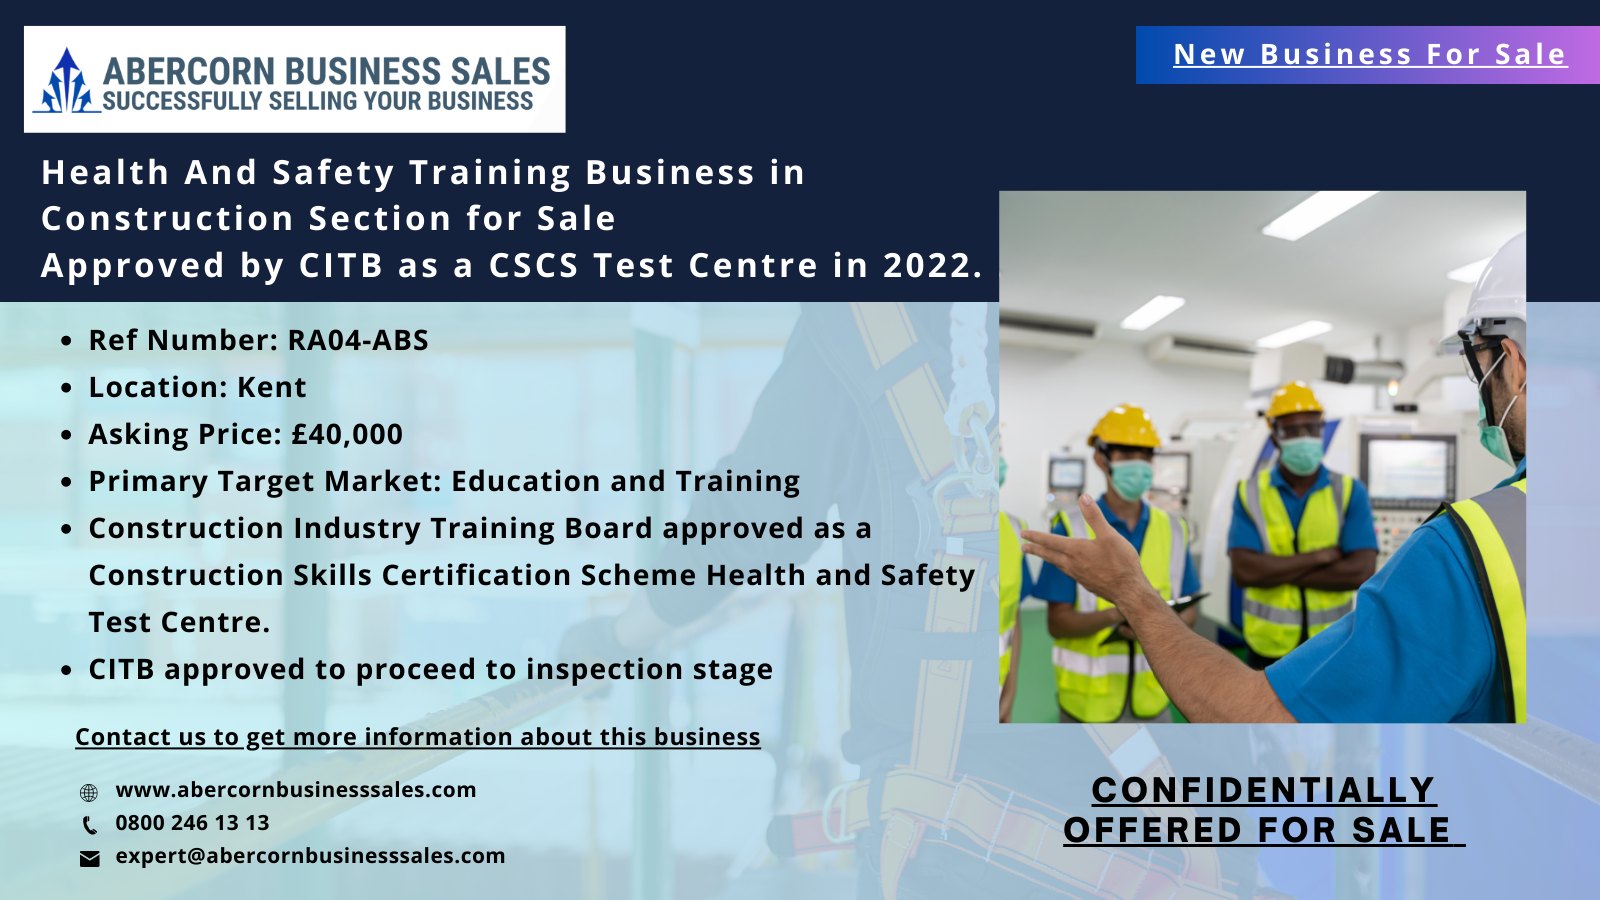 RA04-ABS - Health And Safety Training Business in Construction Section for Sale